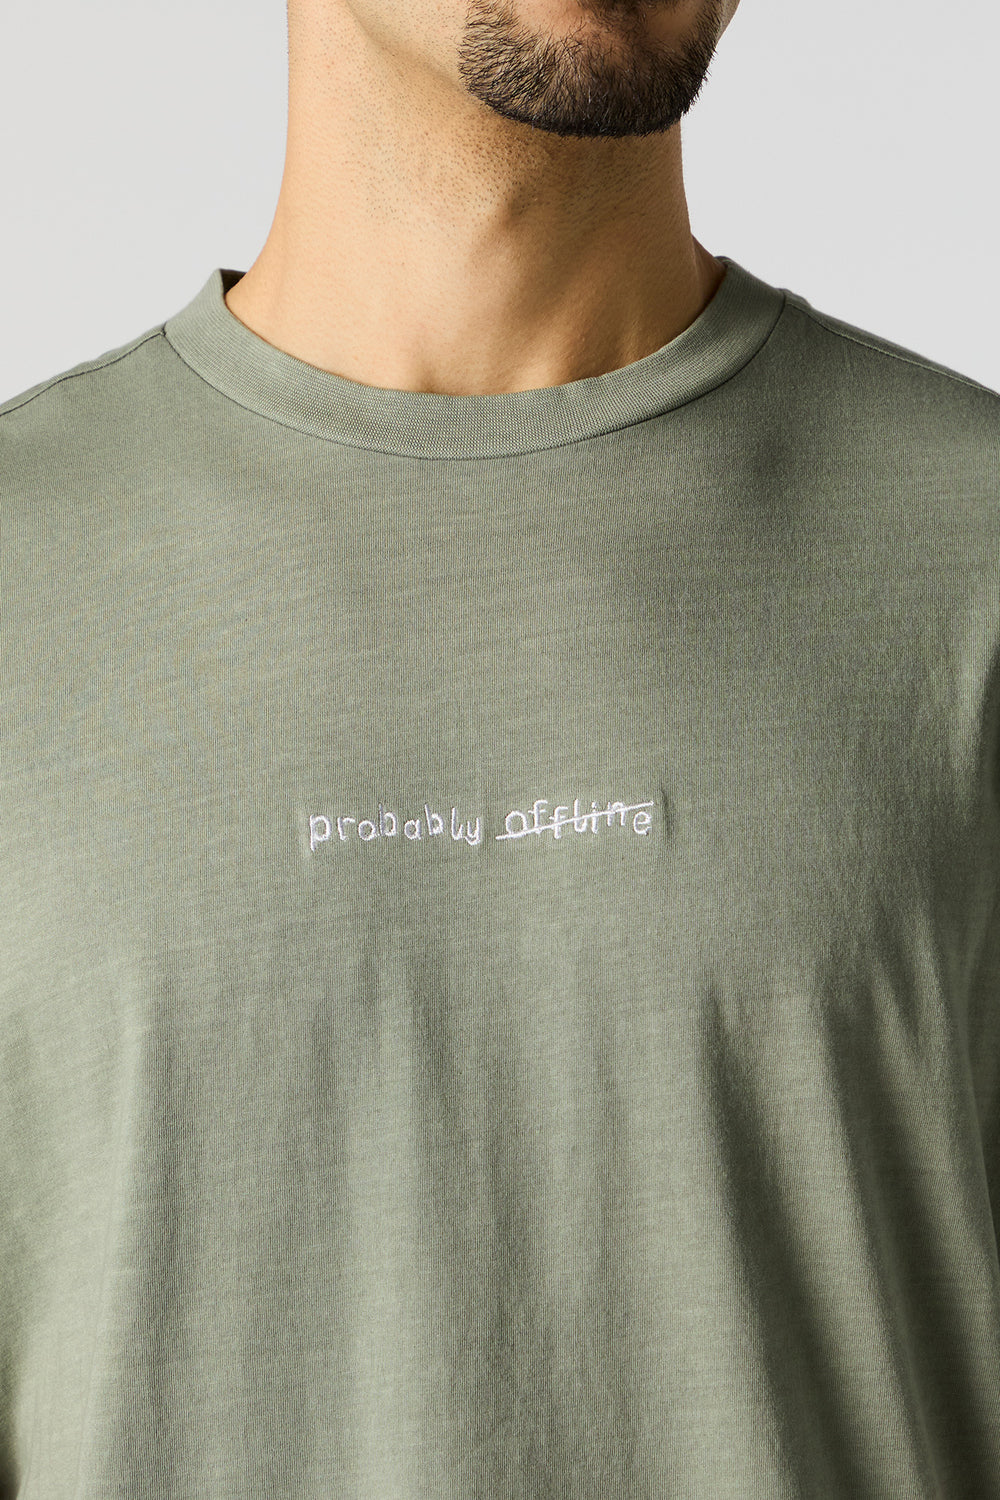 Probably Offline Embroidered T-Shirt Probably Offline Embroidered T-Shirt 2